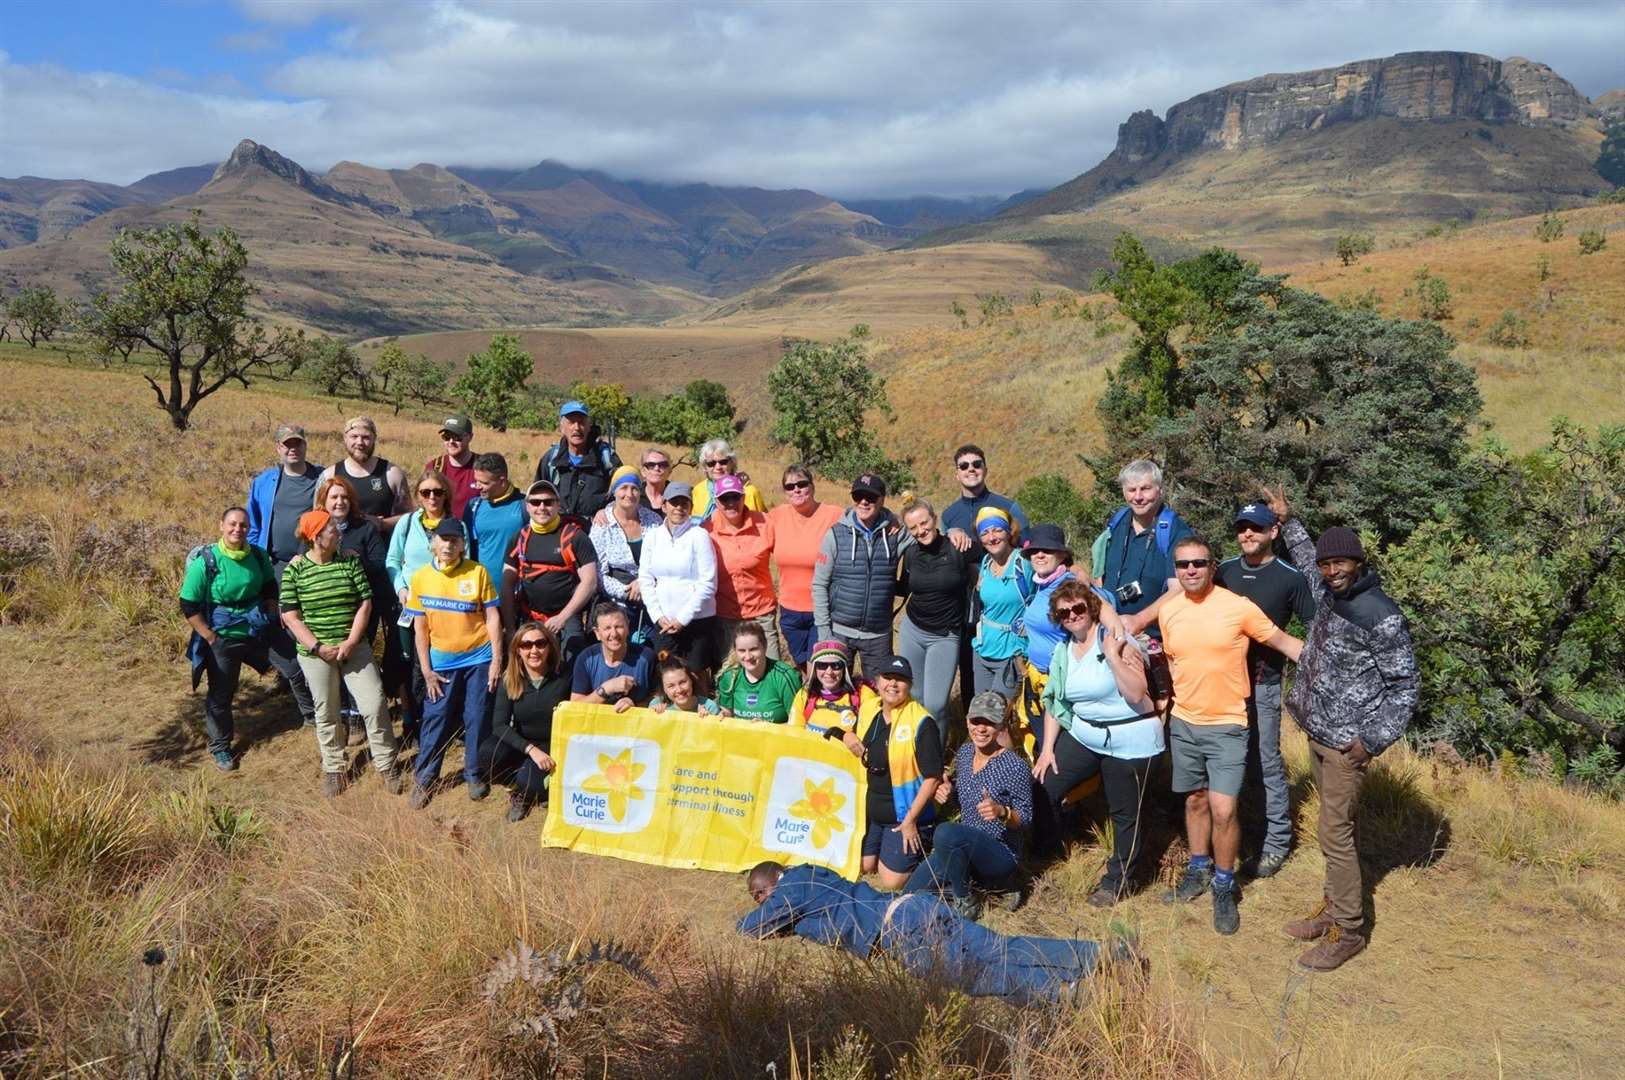 A total of 35 people took part in the trek, including three local guides. Between them they raised nearly £150,000 for Marie Curie.